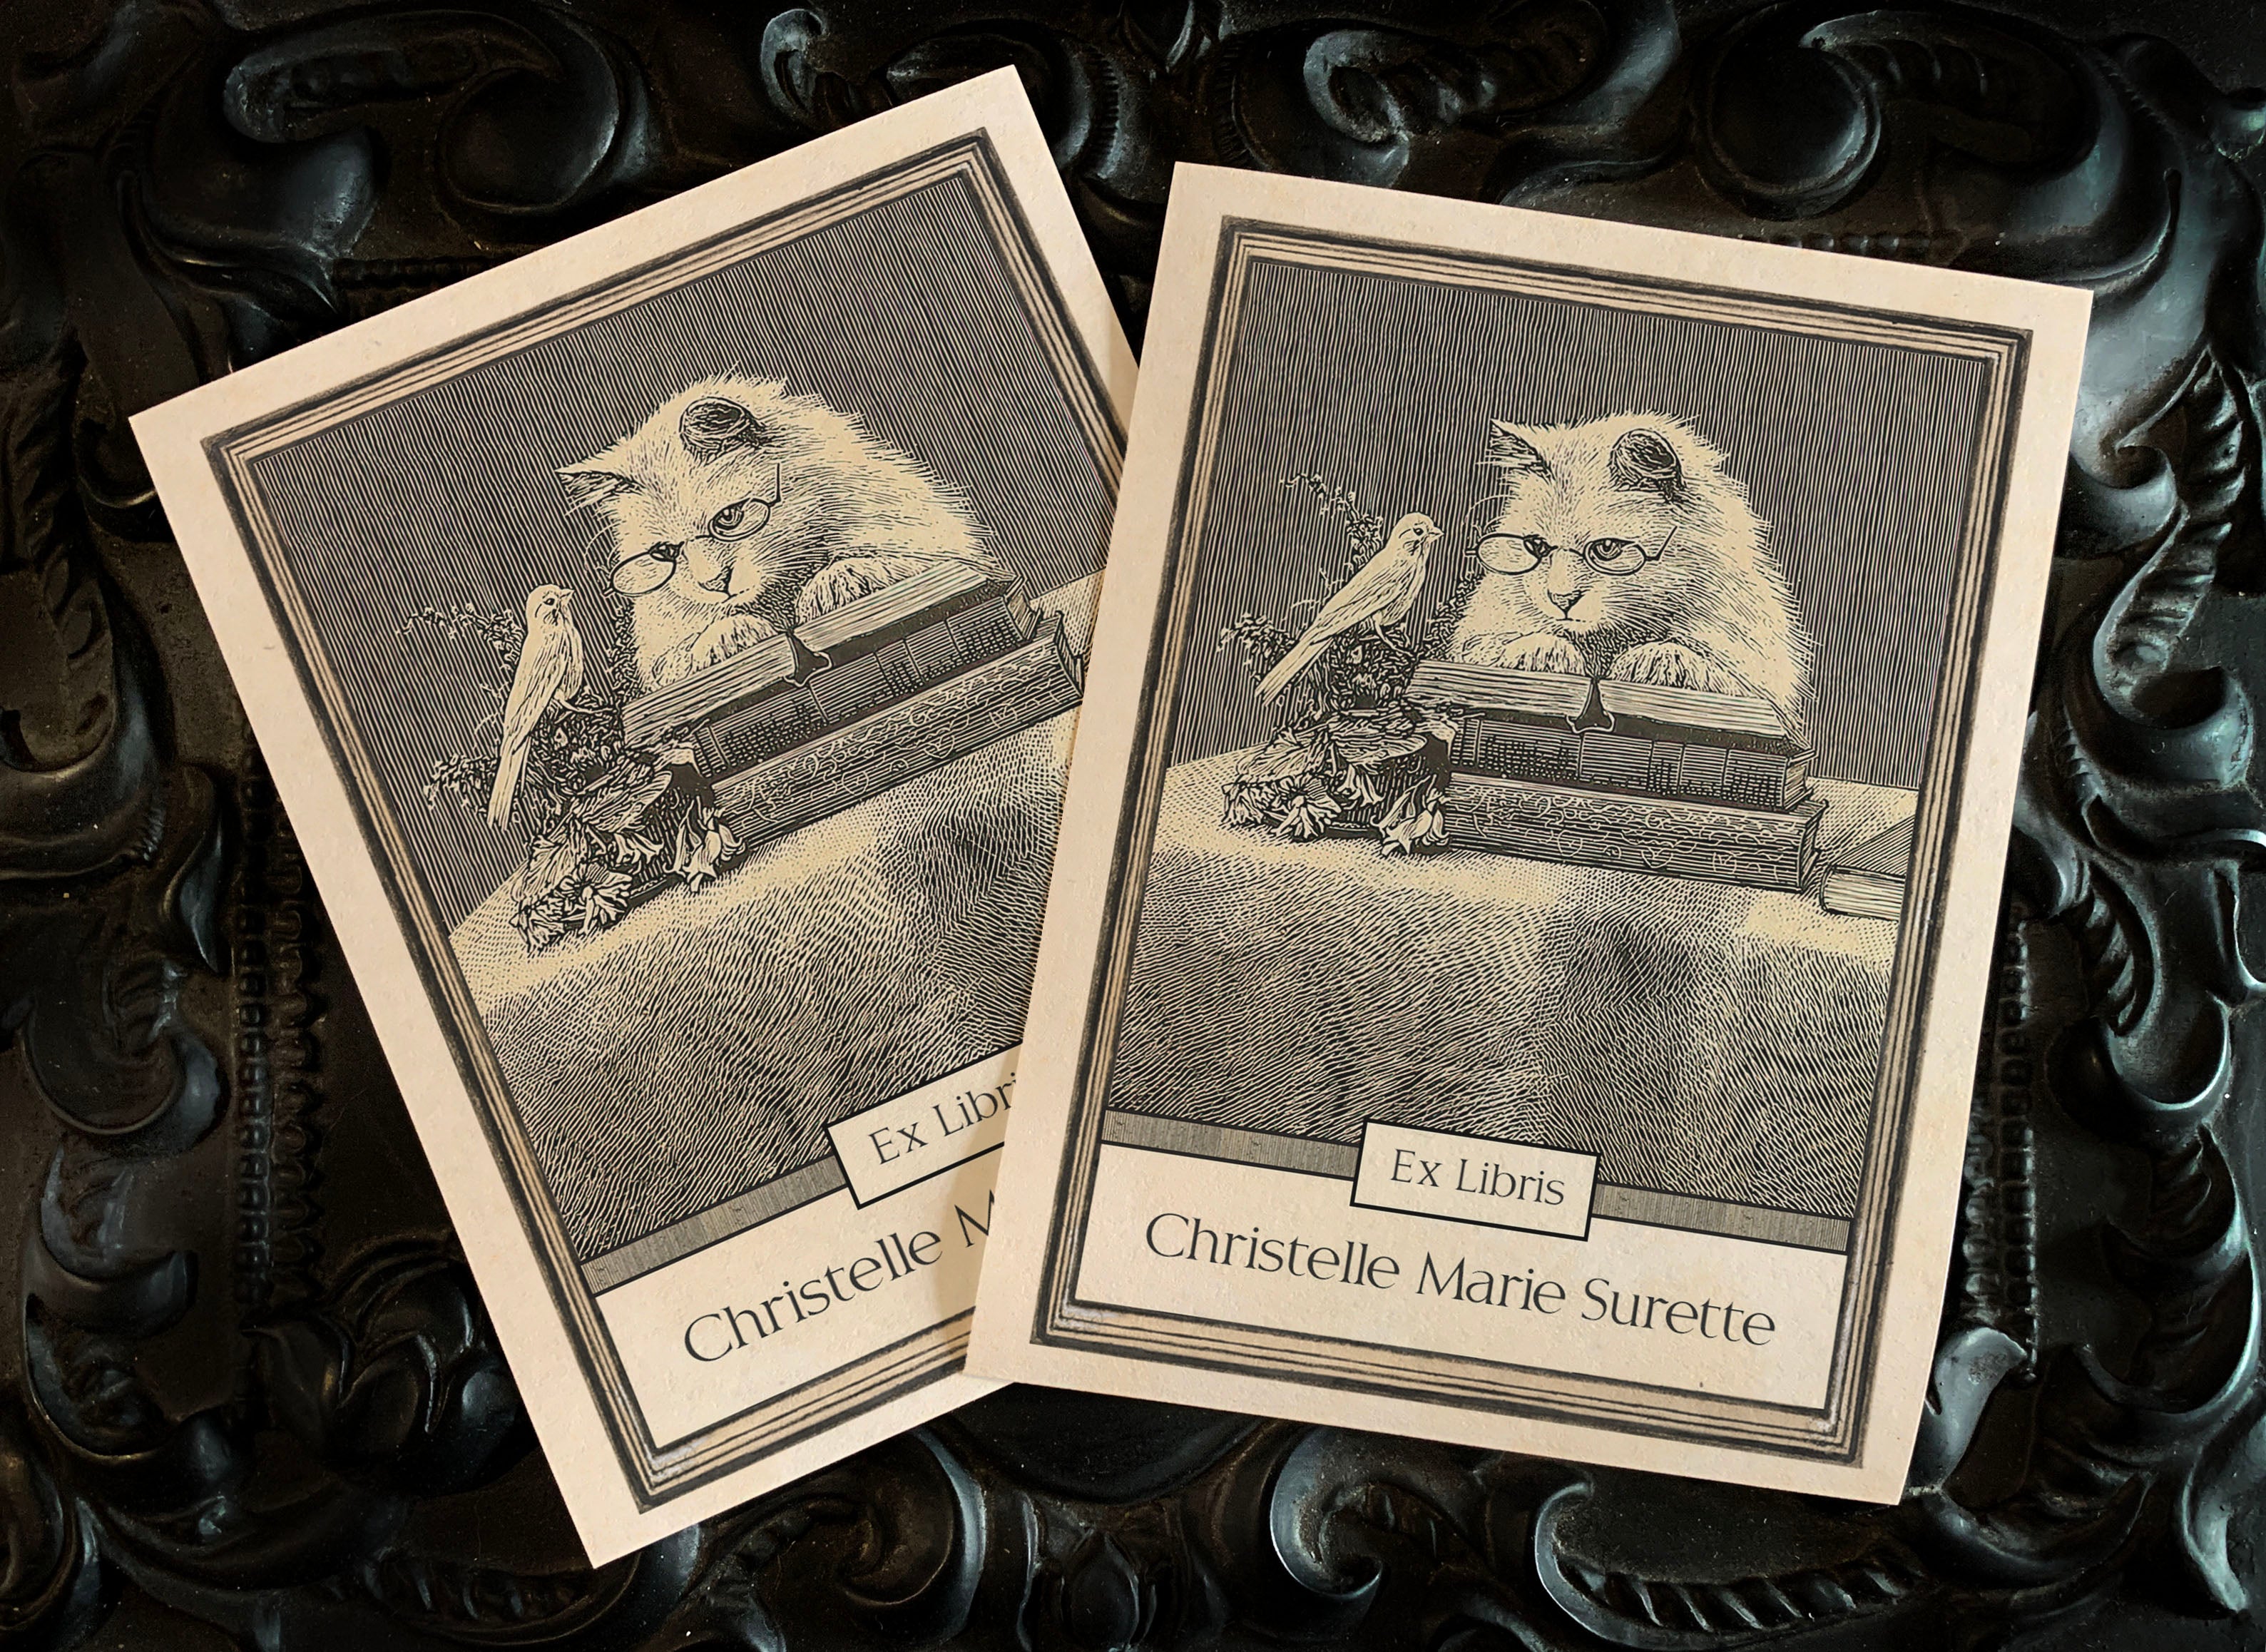 Wise Kitten, Personalized Ex-Libris Bookplates, Crafted on Traditional Gummed Paper, 3in x 4in, Set of 30